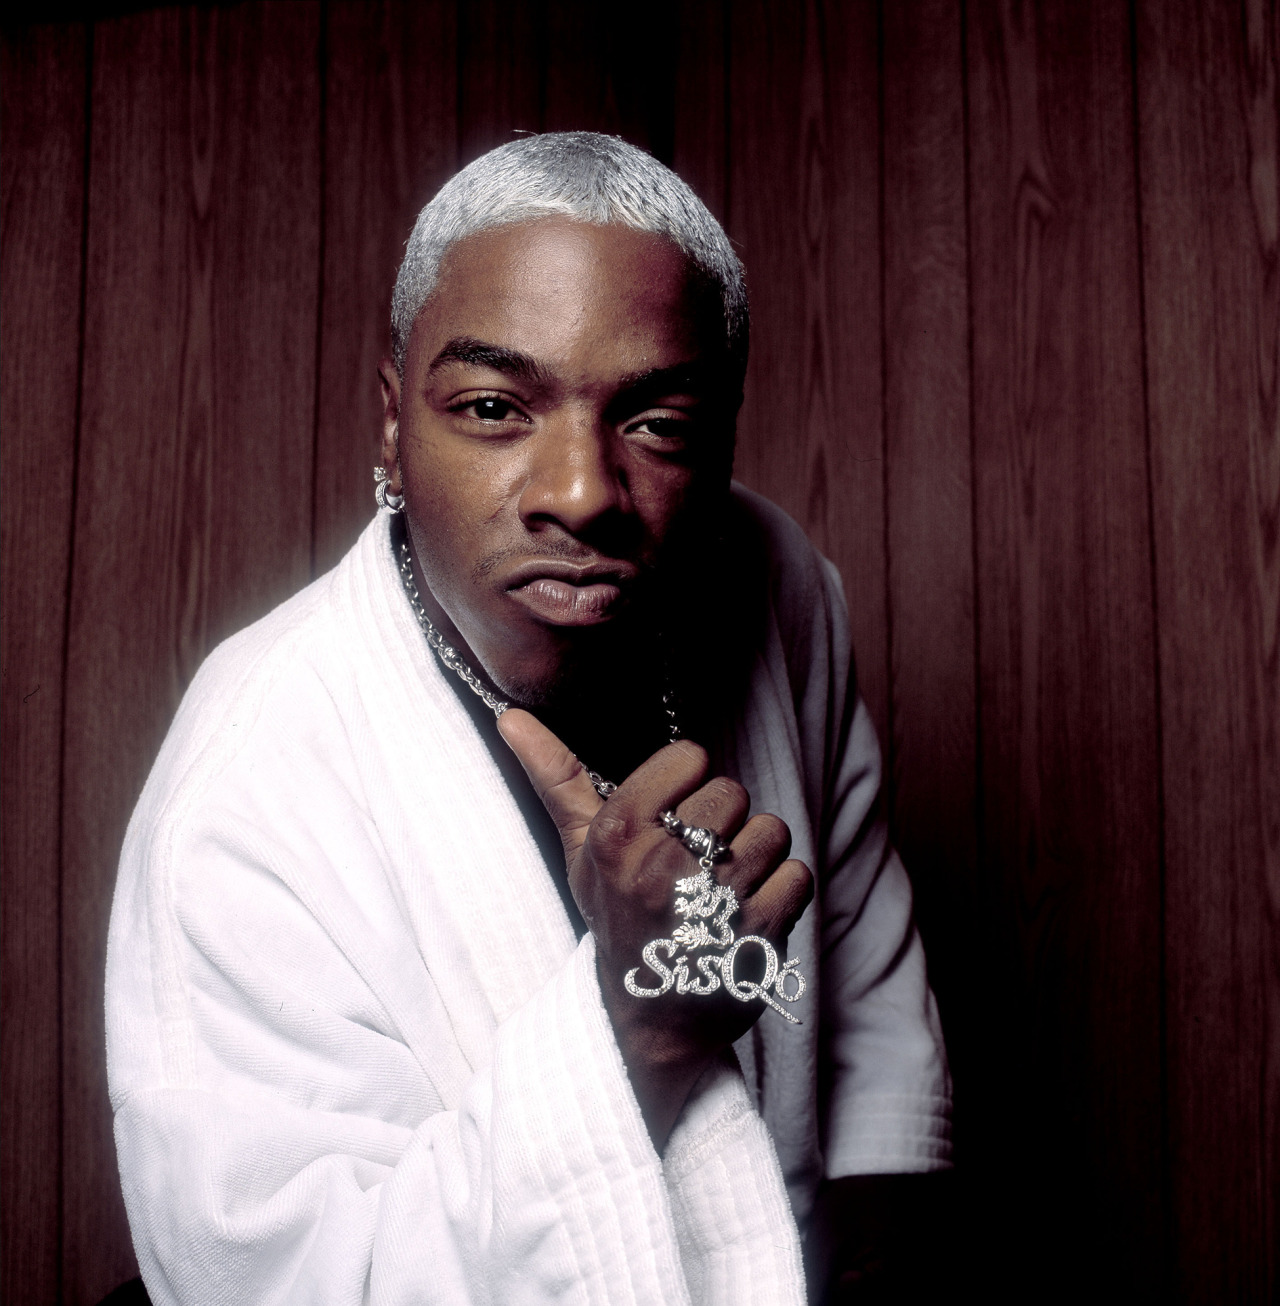 A Second With Sisqo